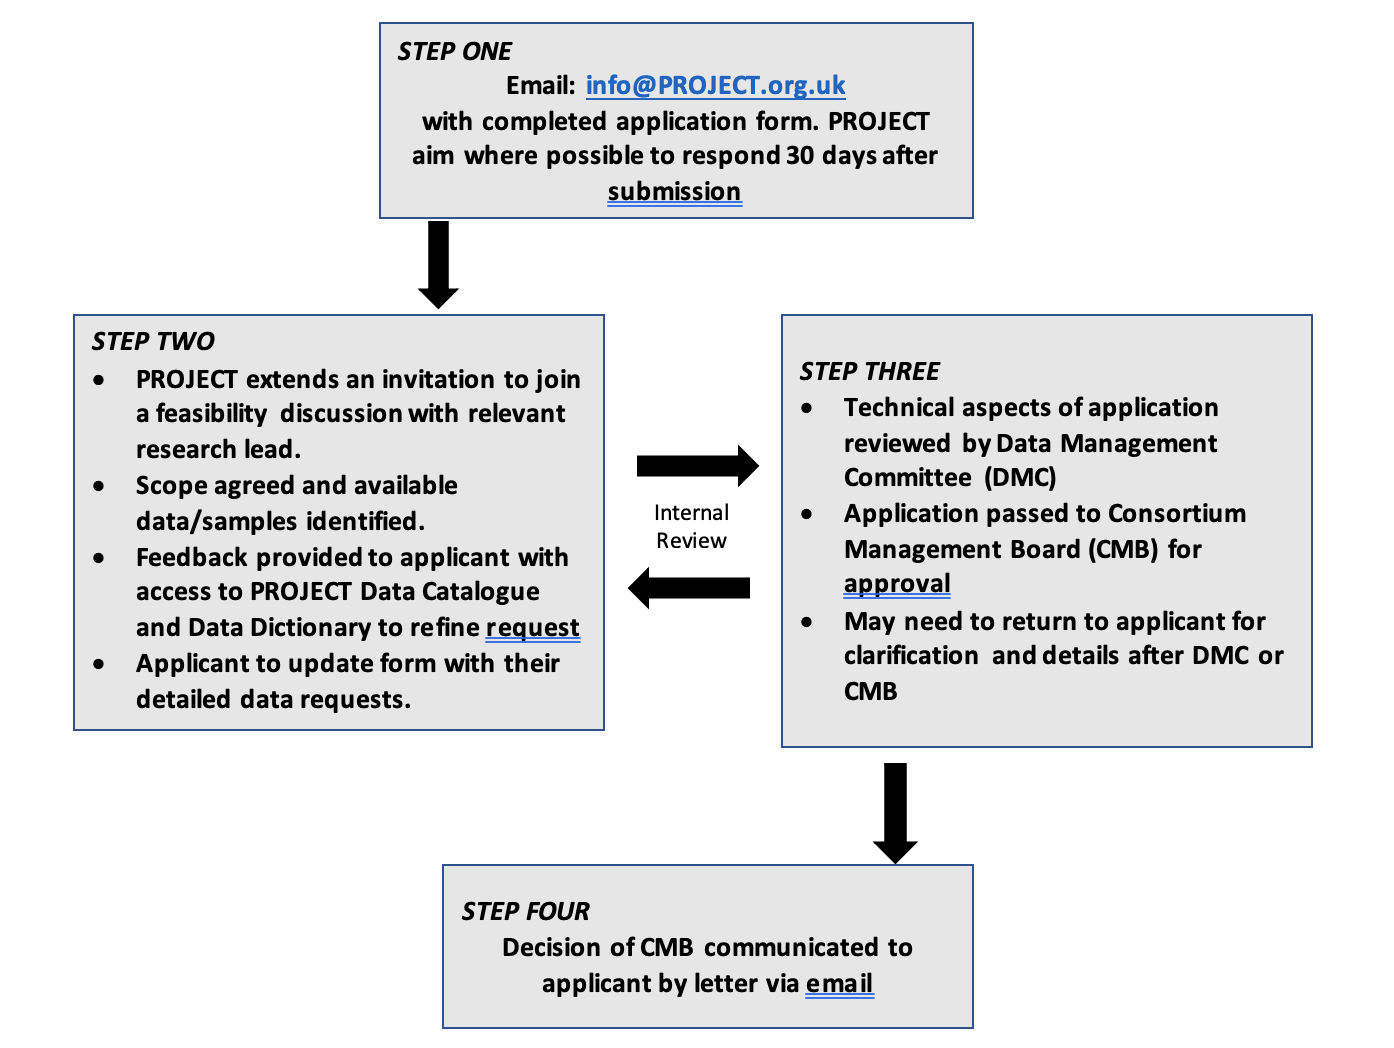 Image of a four step process to request for data access.  Step 1 email the project.  Step 2 Discuss with the project what data or samples are being requested.  Step 3 approval by relevant committees.  Step 4 Decision communicated to requestor. 